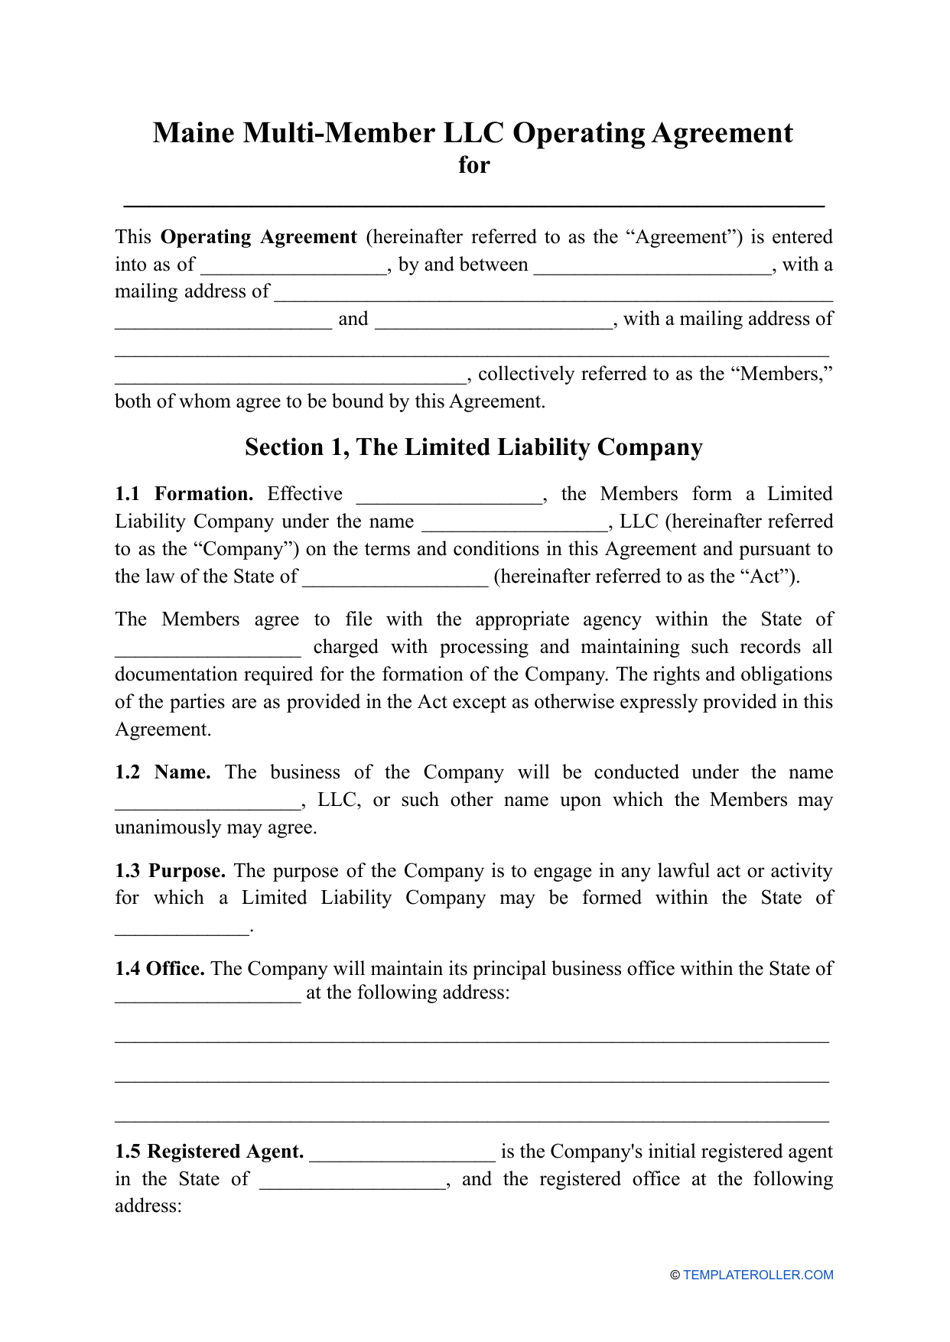 Multi-Member LLC Operating Agreement Template - Maine, Page 1